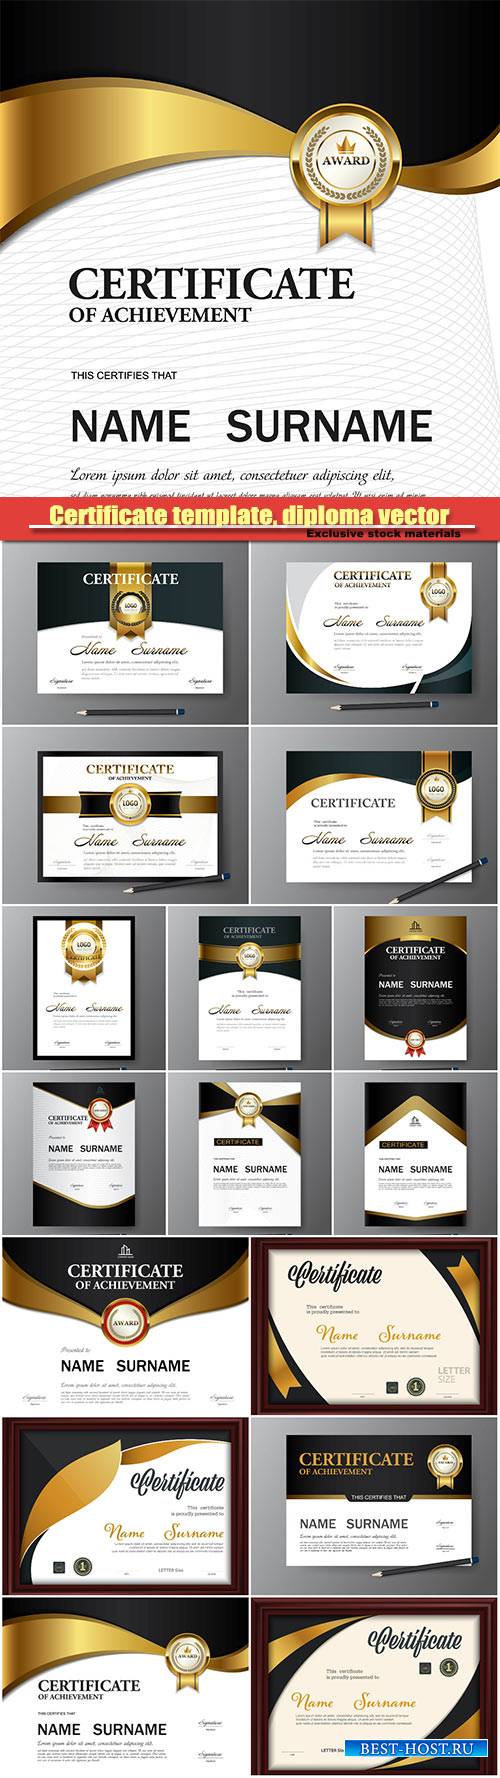 Certificate template, diploma, vector illustration